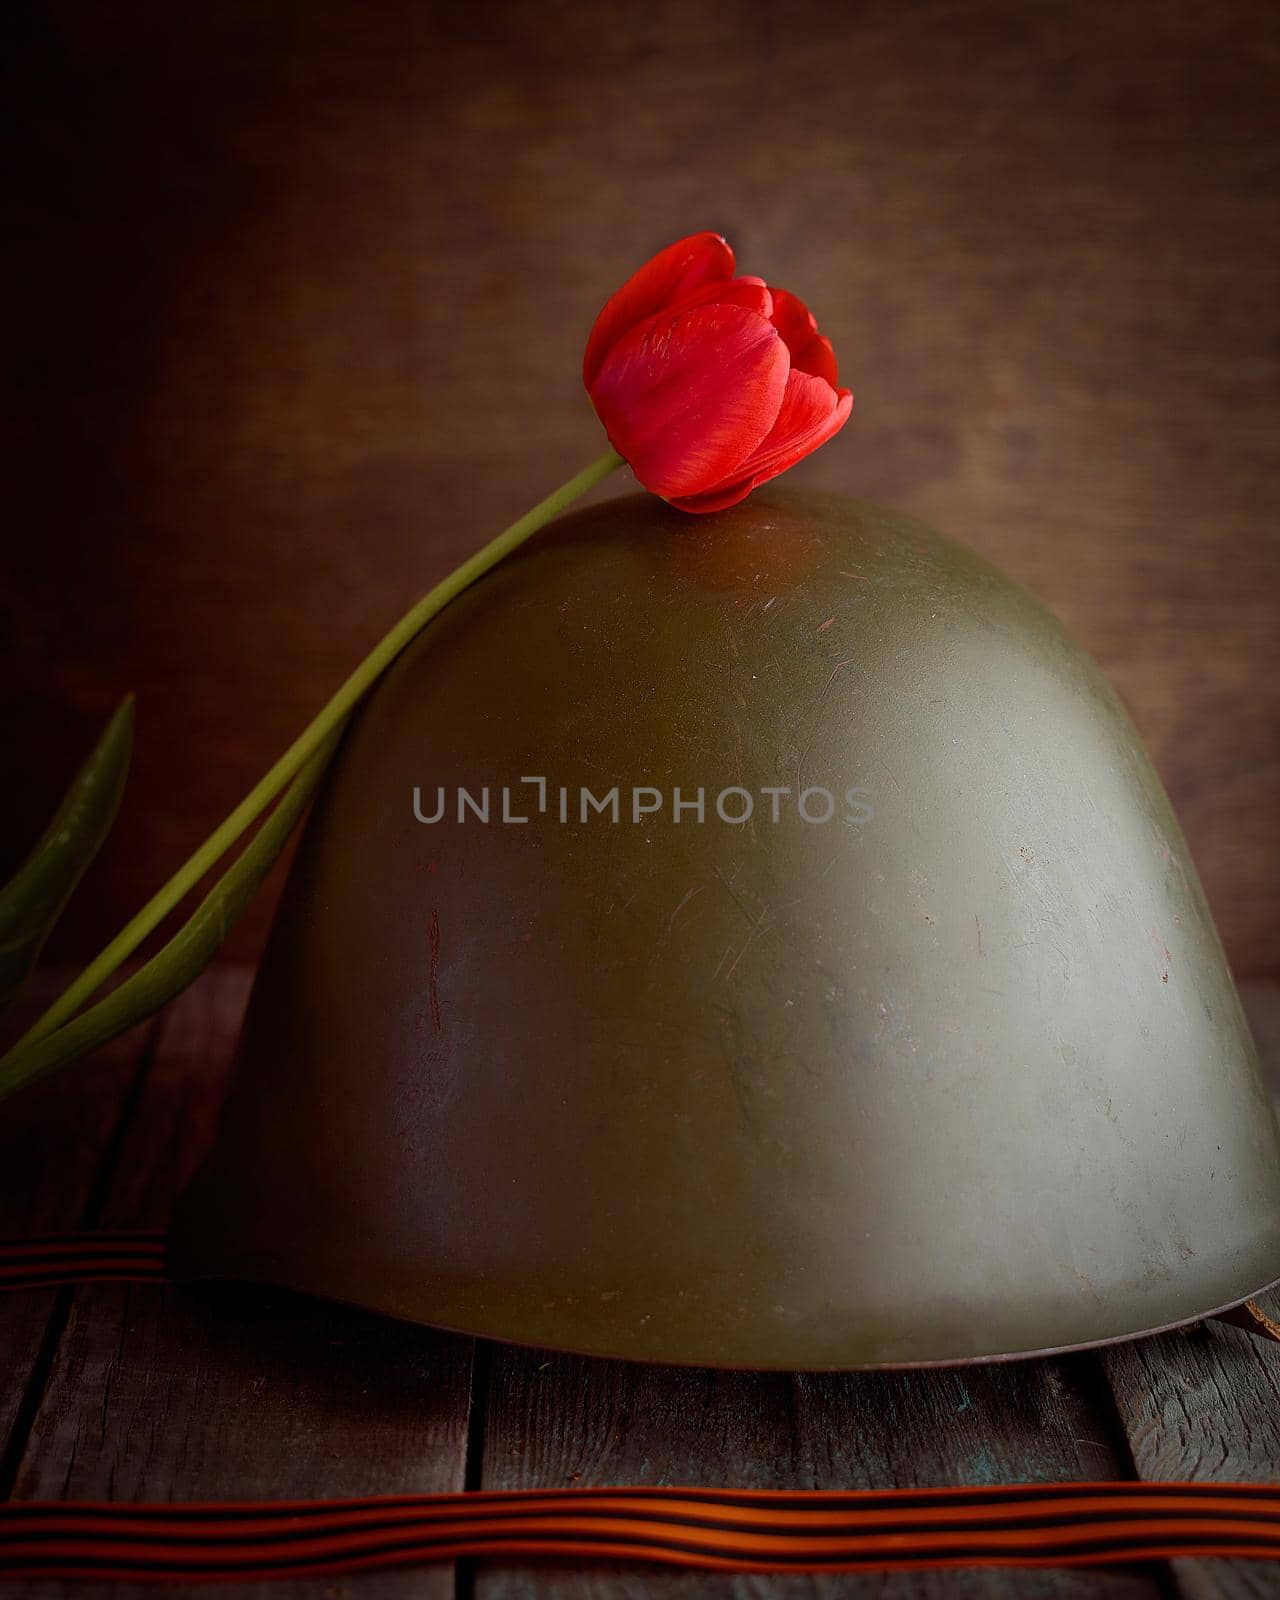 The red tulip flower rests on a soldier's helmet. The pine background by Xelar